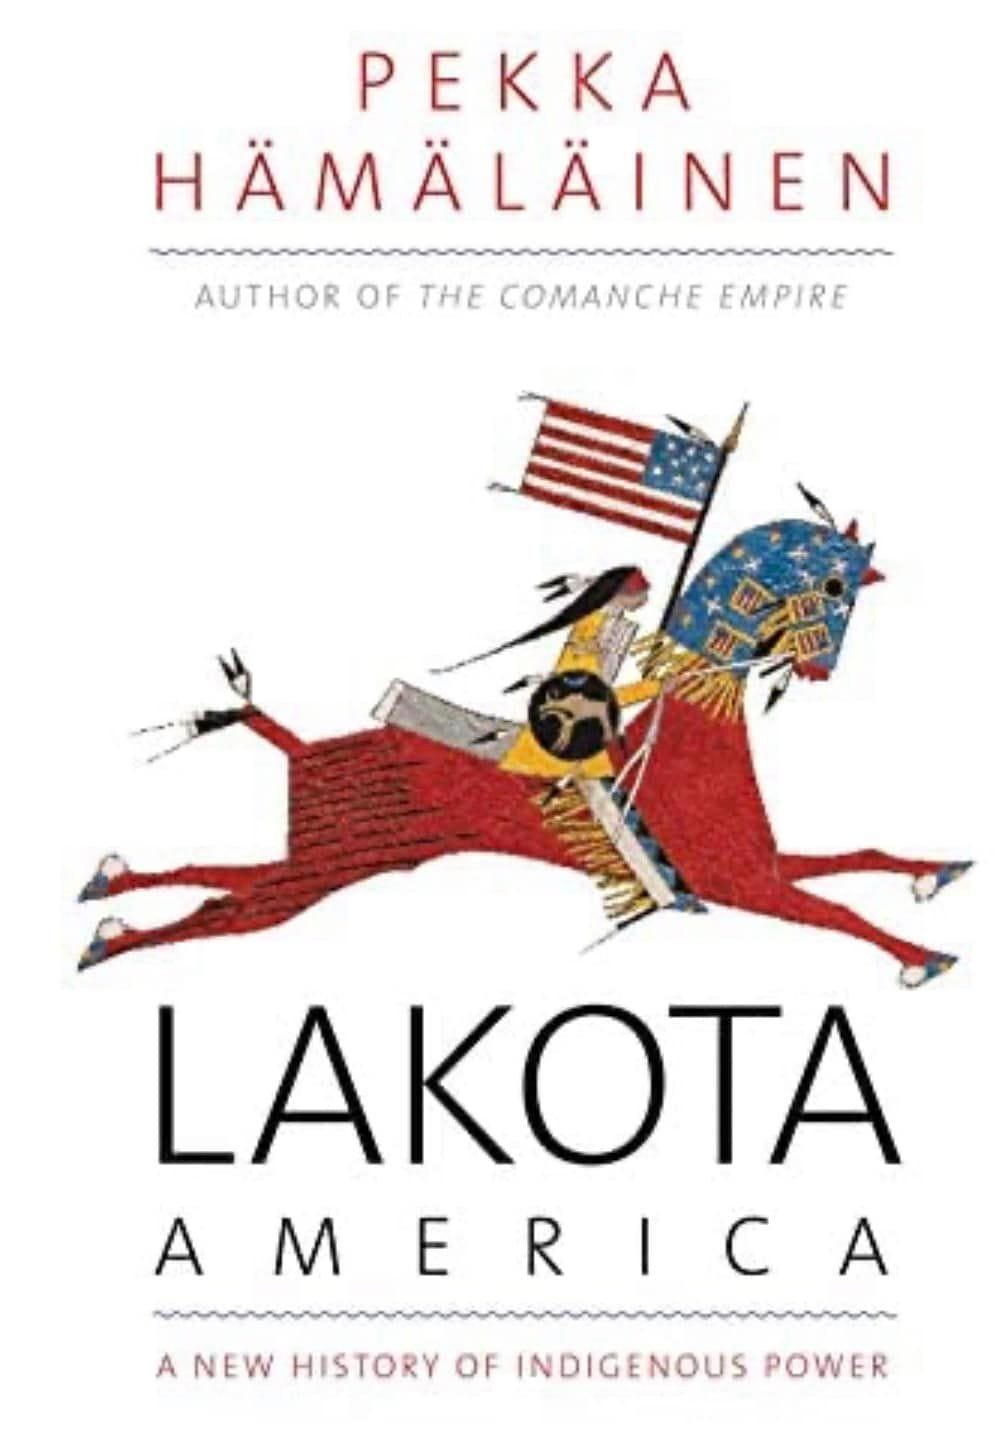 May be an image of text that says 'PEKKA HÄMÄLÄINEN AUTHOR OF THE COMANCHE EMPIRE LAKOTA AMERICA NEW HISTORY OF INDIGENOUS POWER'